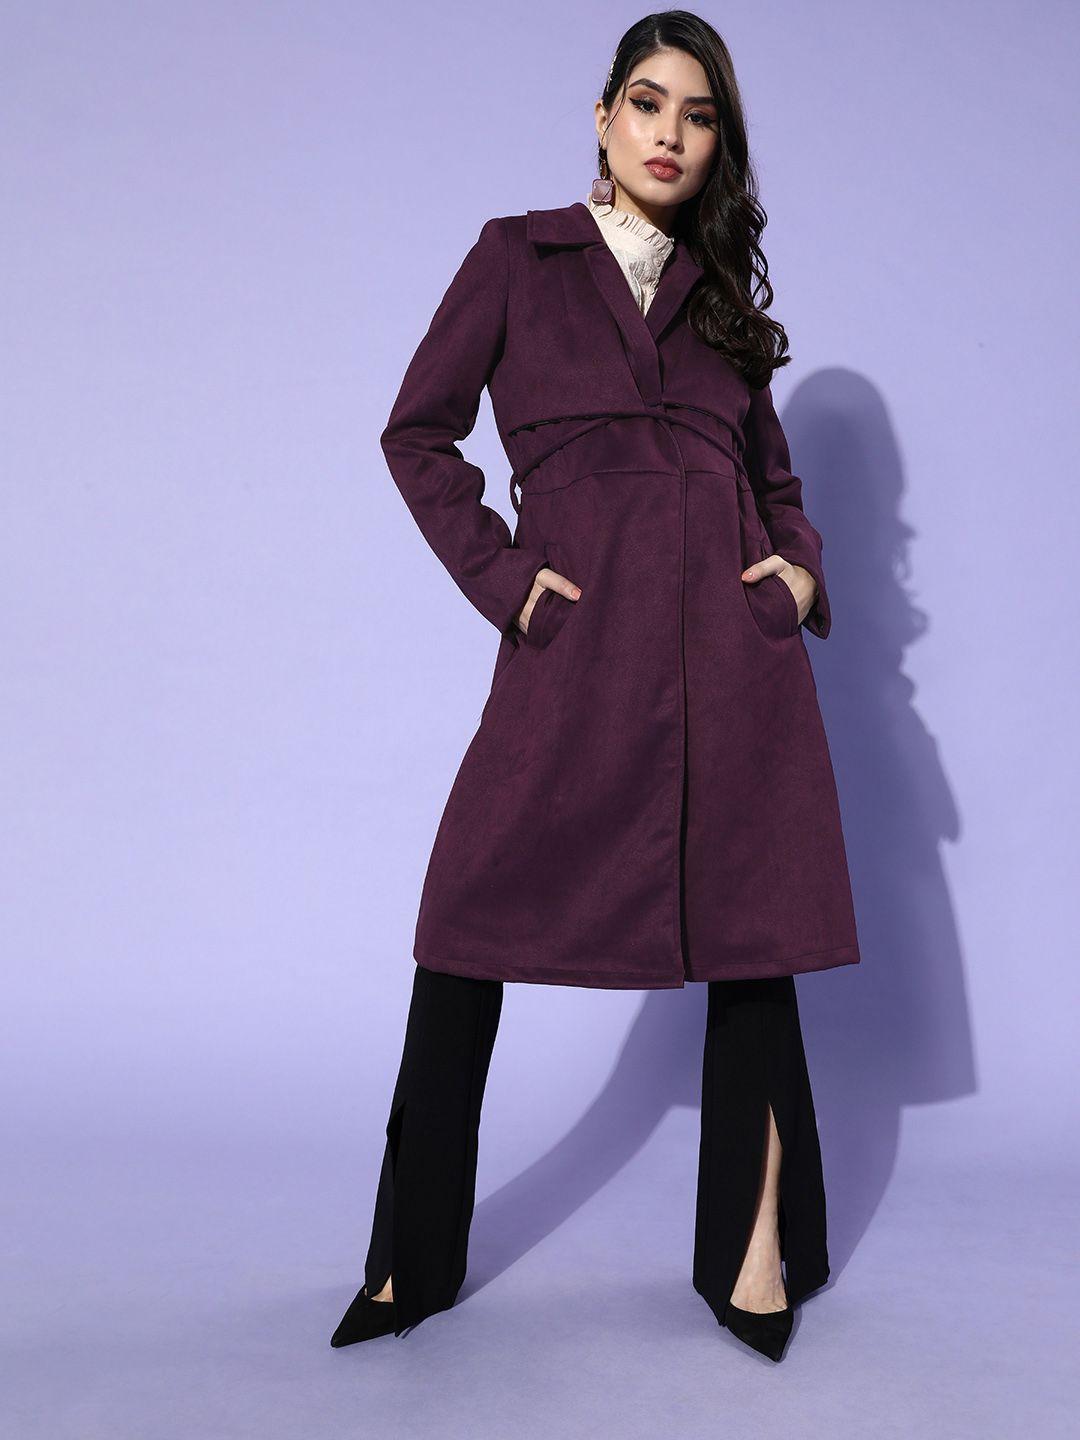 athena women charming purple solid trench coat